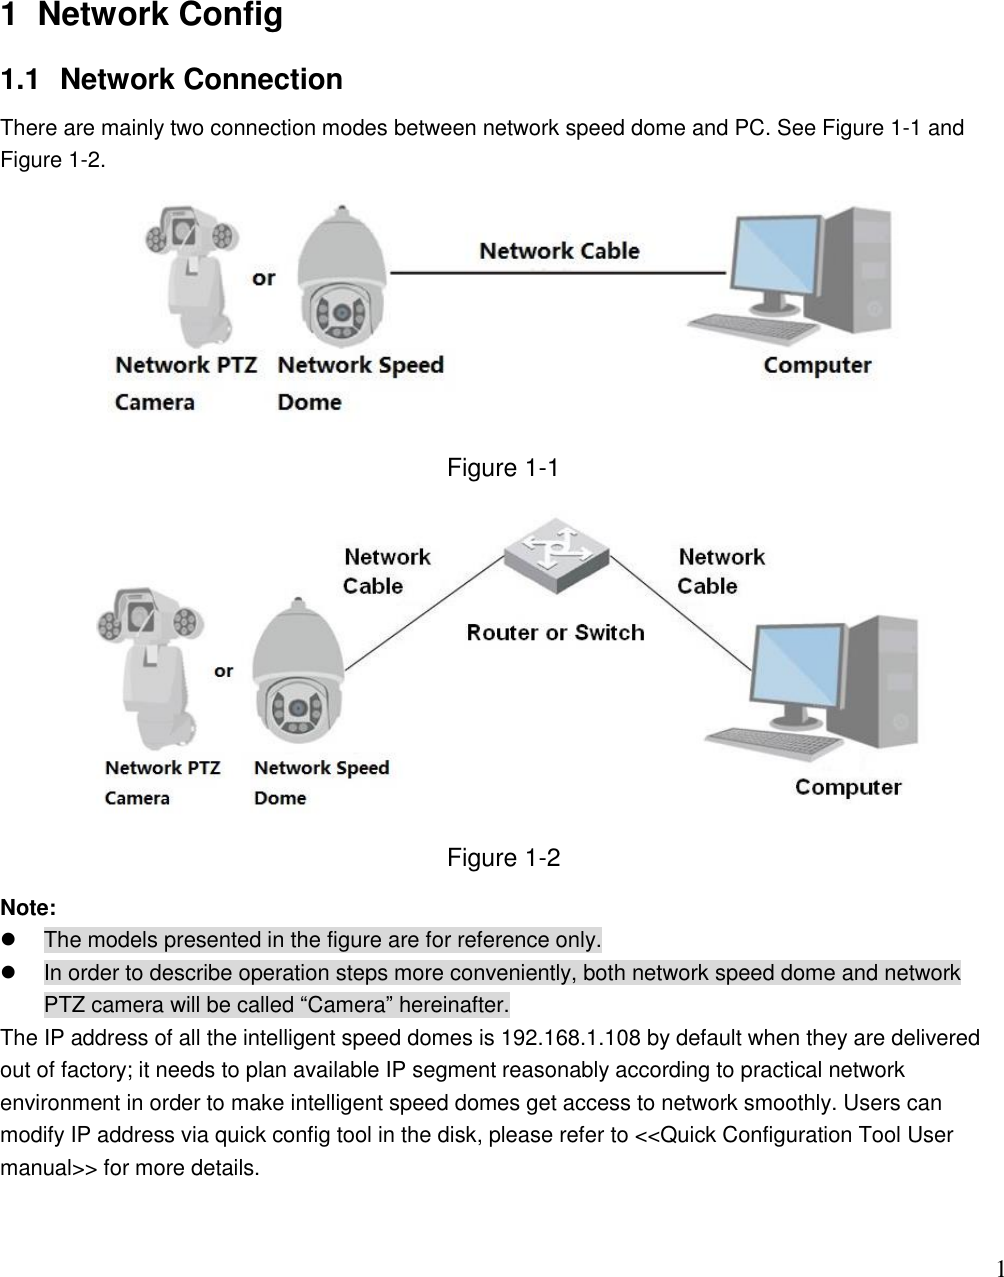                                                                              1 1  Network Config 1.1  Network Connection There are mainly two connection modes between network speed dome and PC. See Figure 1-1 and Figure 1-2.  Figure 1-1  Figure 1-2 Note:    The models presented in the figure are for reference only.    In order to describe operation steps more conveniently, both network speed dome and network PTZ camera will be called “Camera” hereinafter. The IP address of all the intelligent speed domes is 192.168.1.108 by default when they are delivered out of factory; it needs to plan available IP segment reasonably according to practical network environment in order to make intelligent speed domes get access to network smoothly. Users can modify IP address via quick config tool in the disk, please refer to &lt;&lt;Quick Configuration Tool User manual&gt;&gt; for more details.    